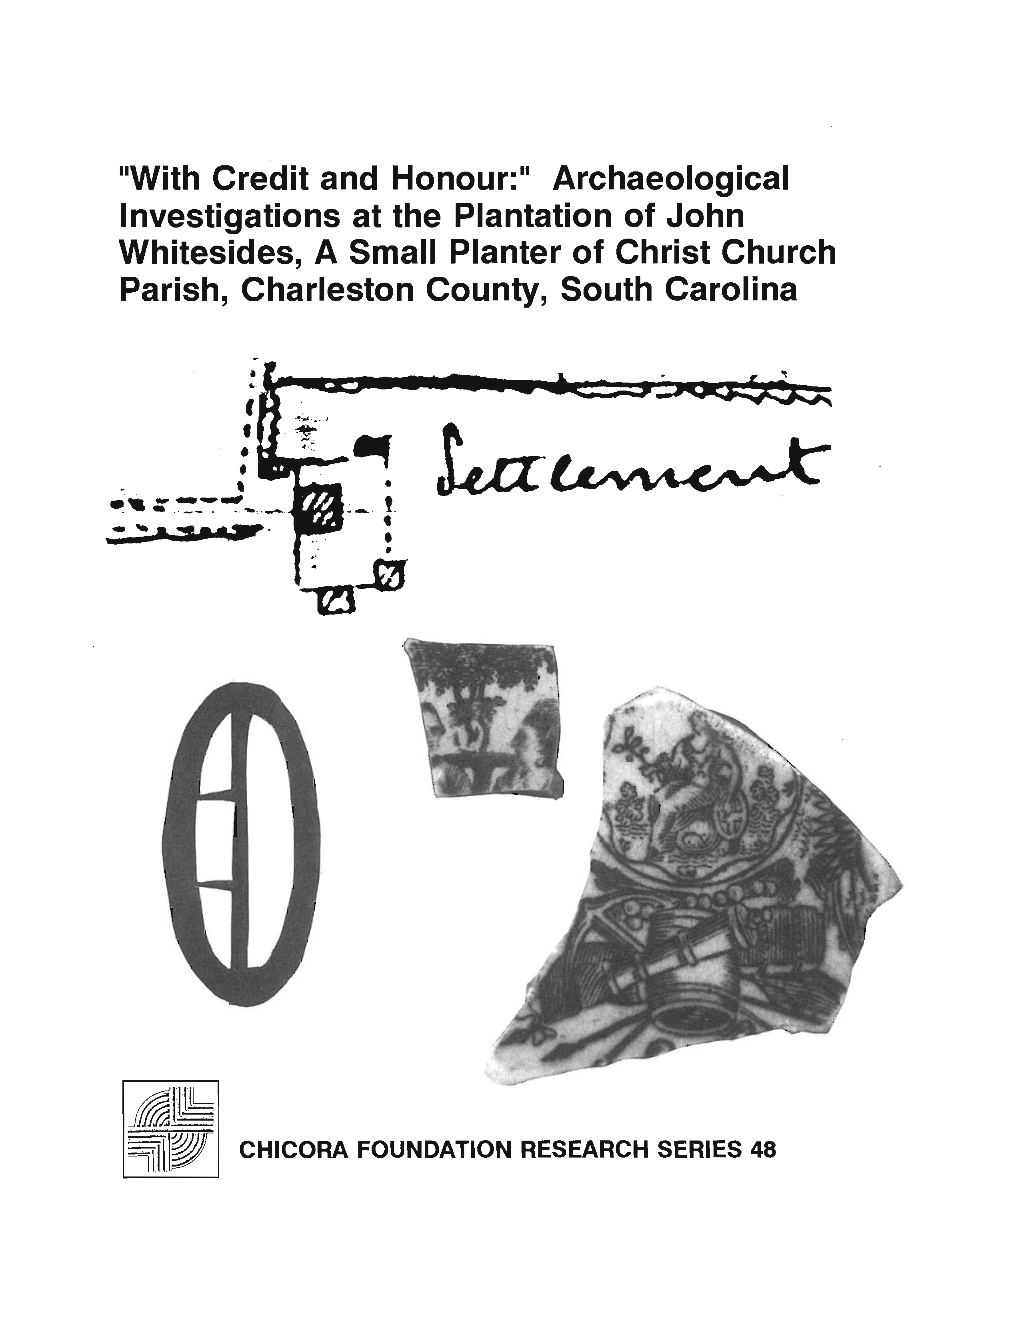 Iiwith Credit and Honour:1I Archaeological Investigations at the Plantation of John Whitesides, a Small Planter of Christ Church Parish, Charleston County, South Carolina